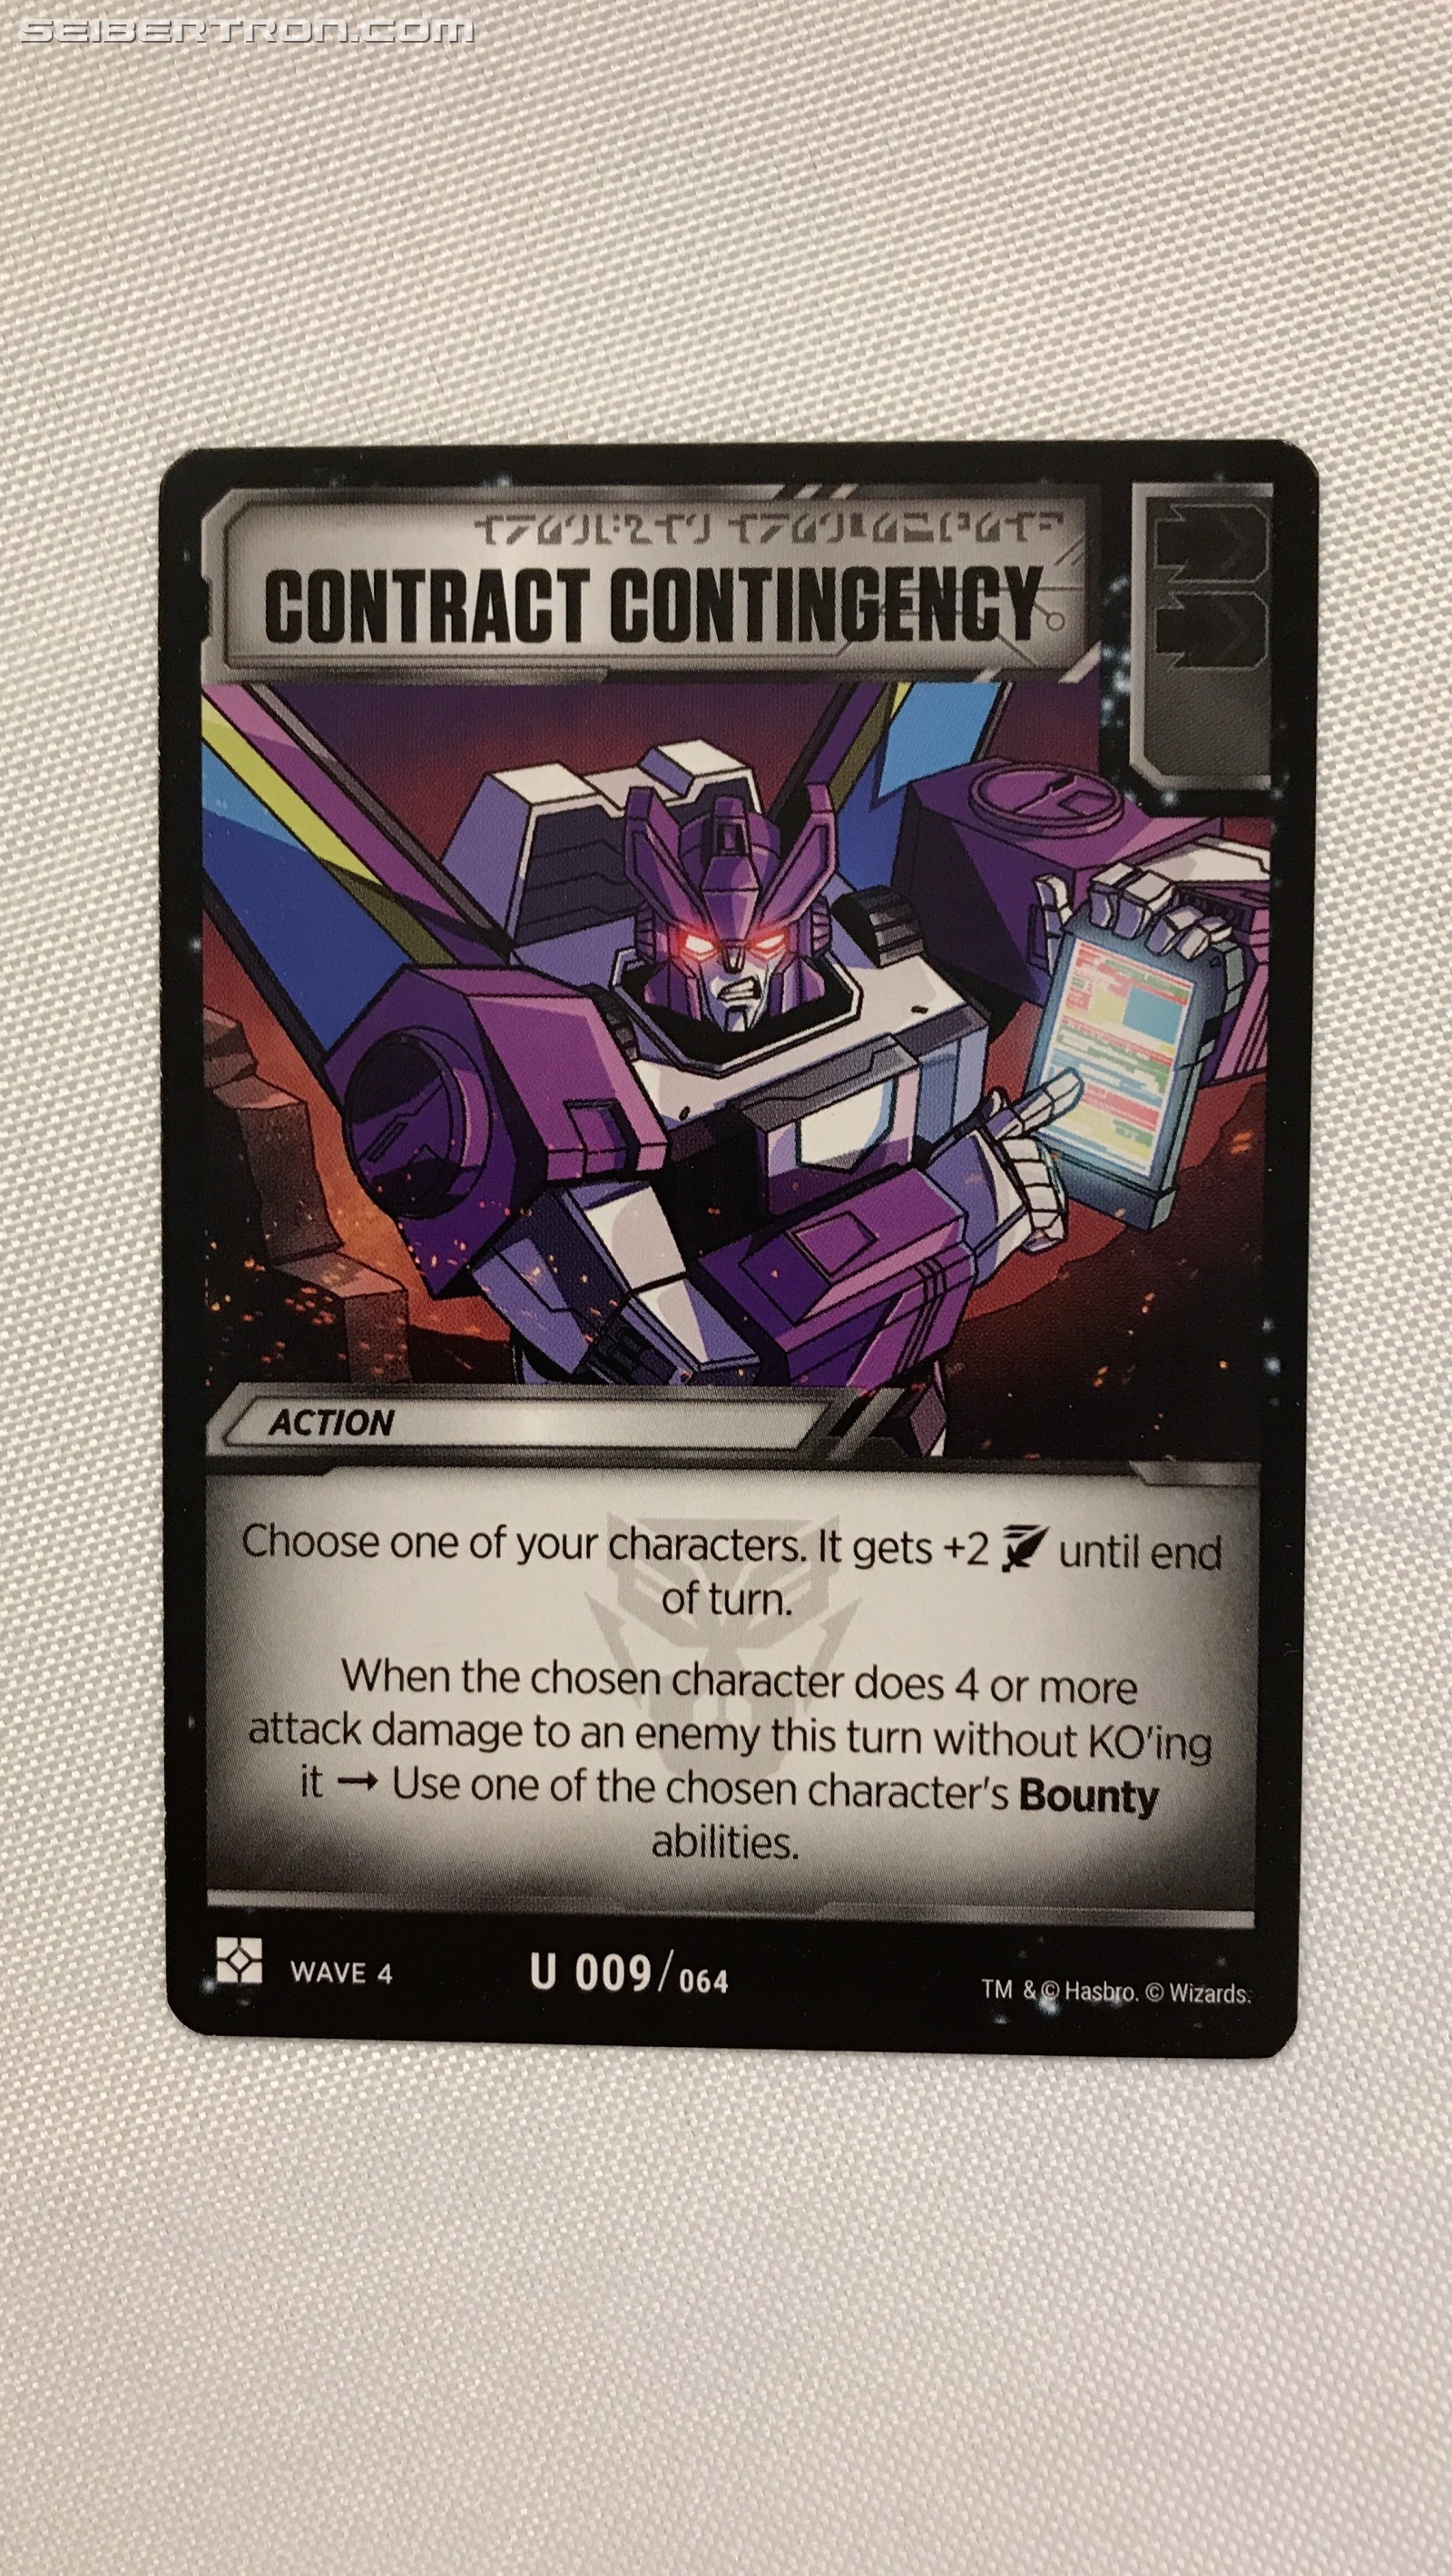 SDCC 2019 Transformers TCG Siege War For Cybertron Trilogy Convention Pack 